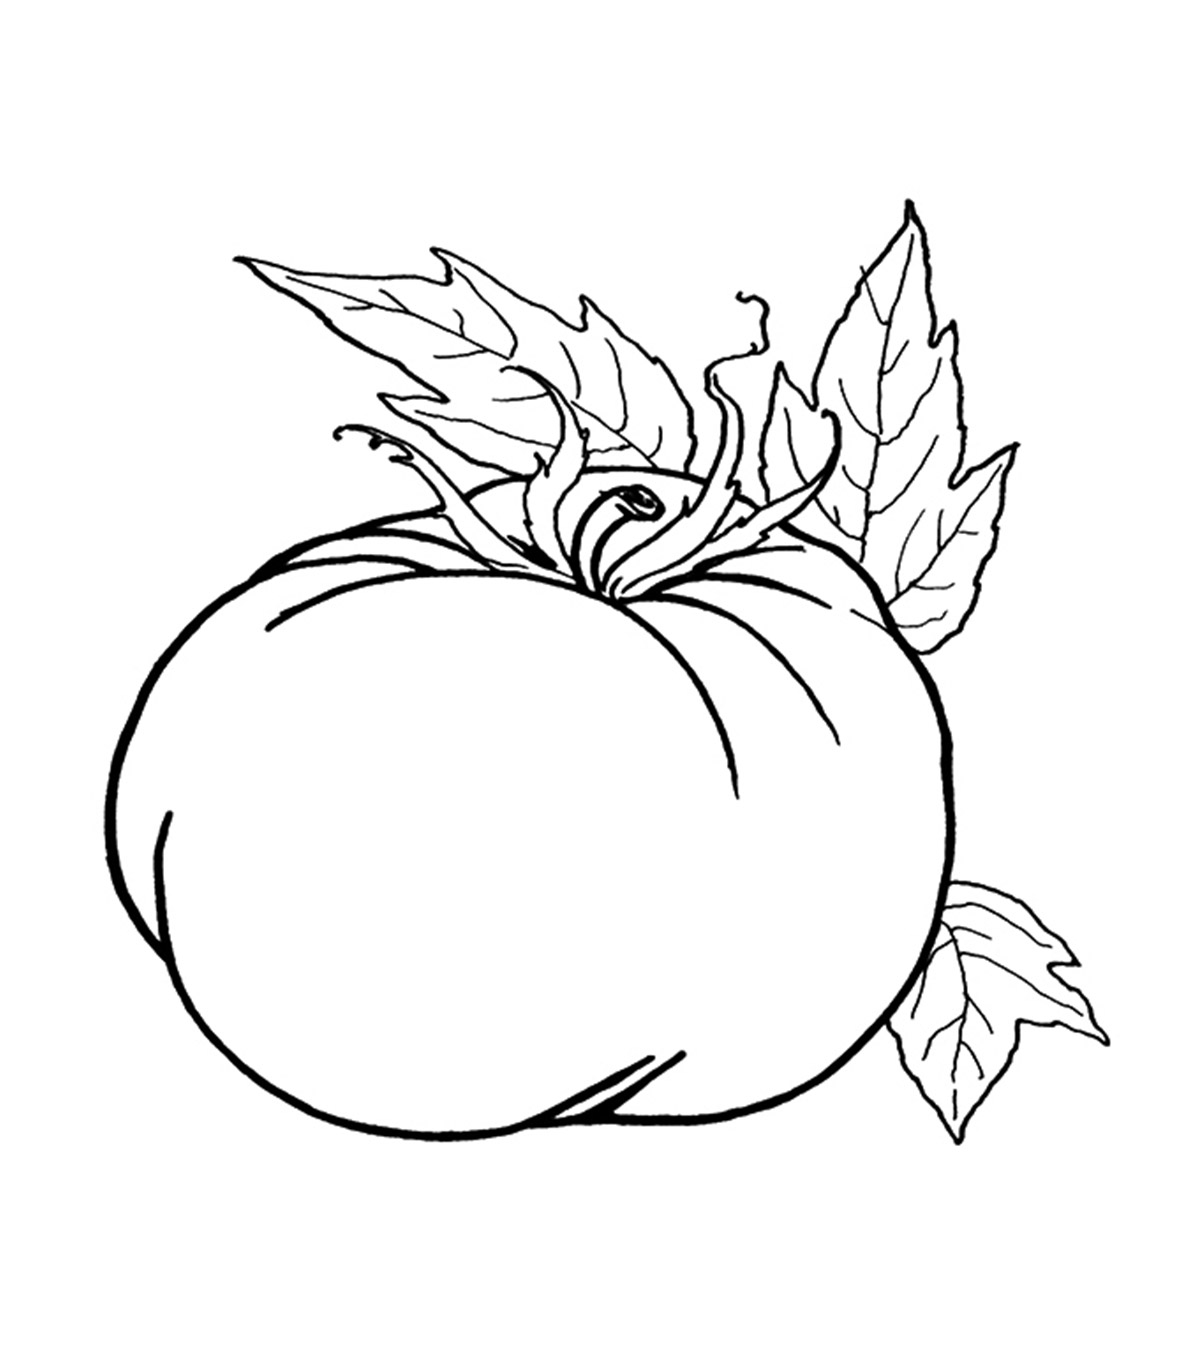 Top 24 Pumpkin Coloring Pages For Your Little Ones_image